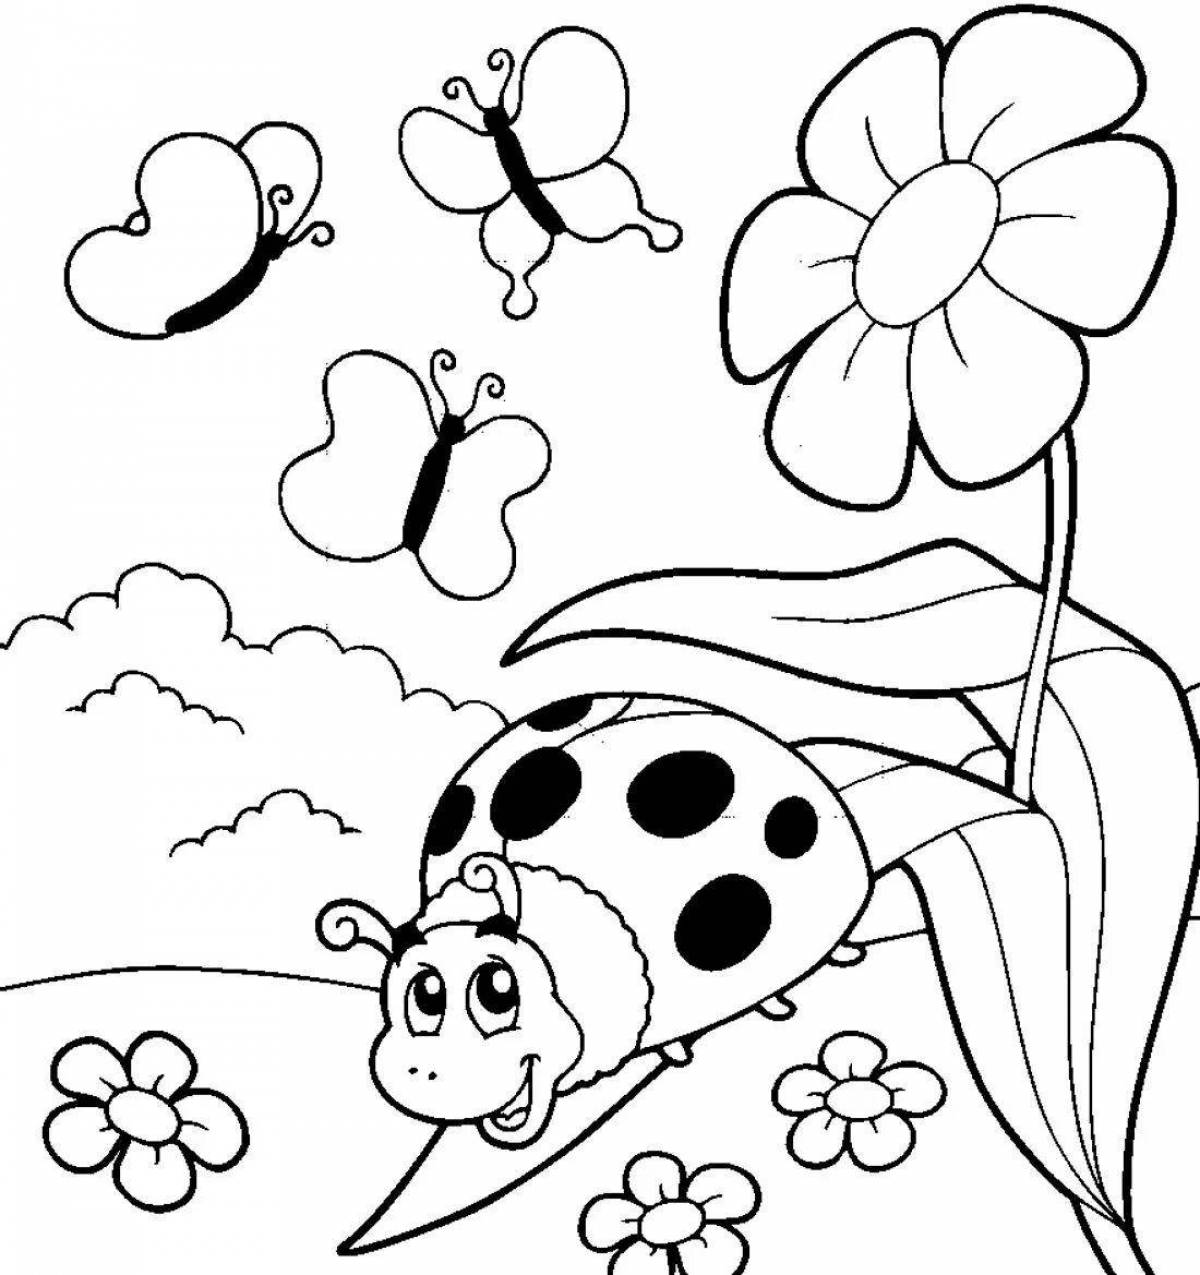 Attractive ladybug coloring book for kids